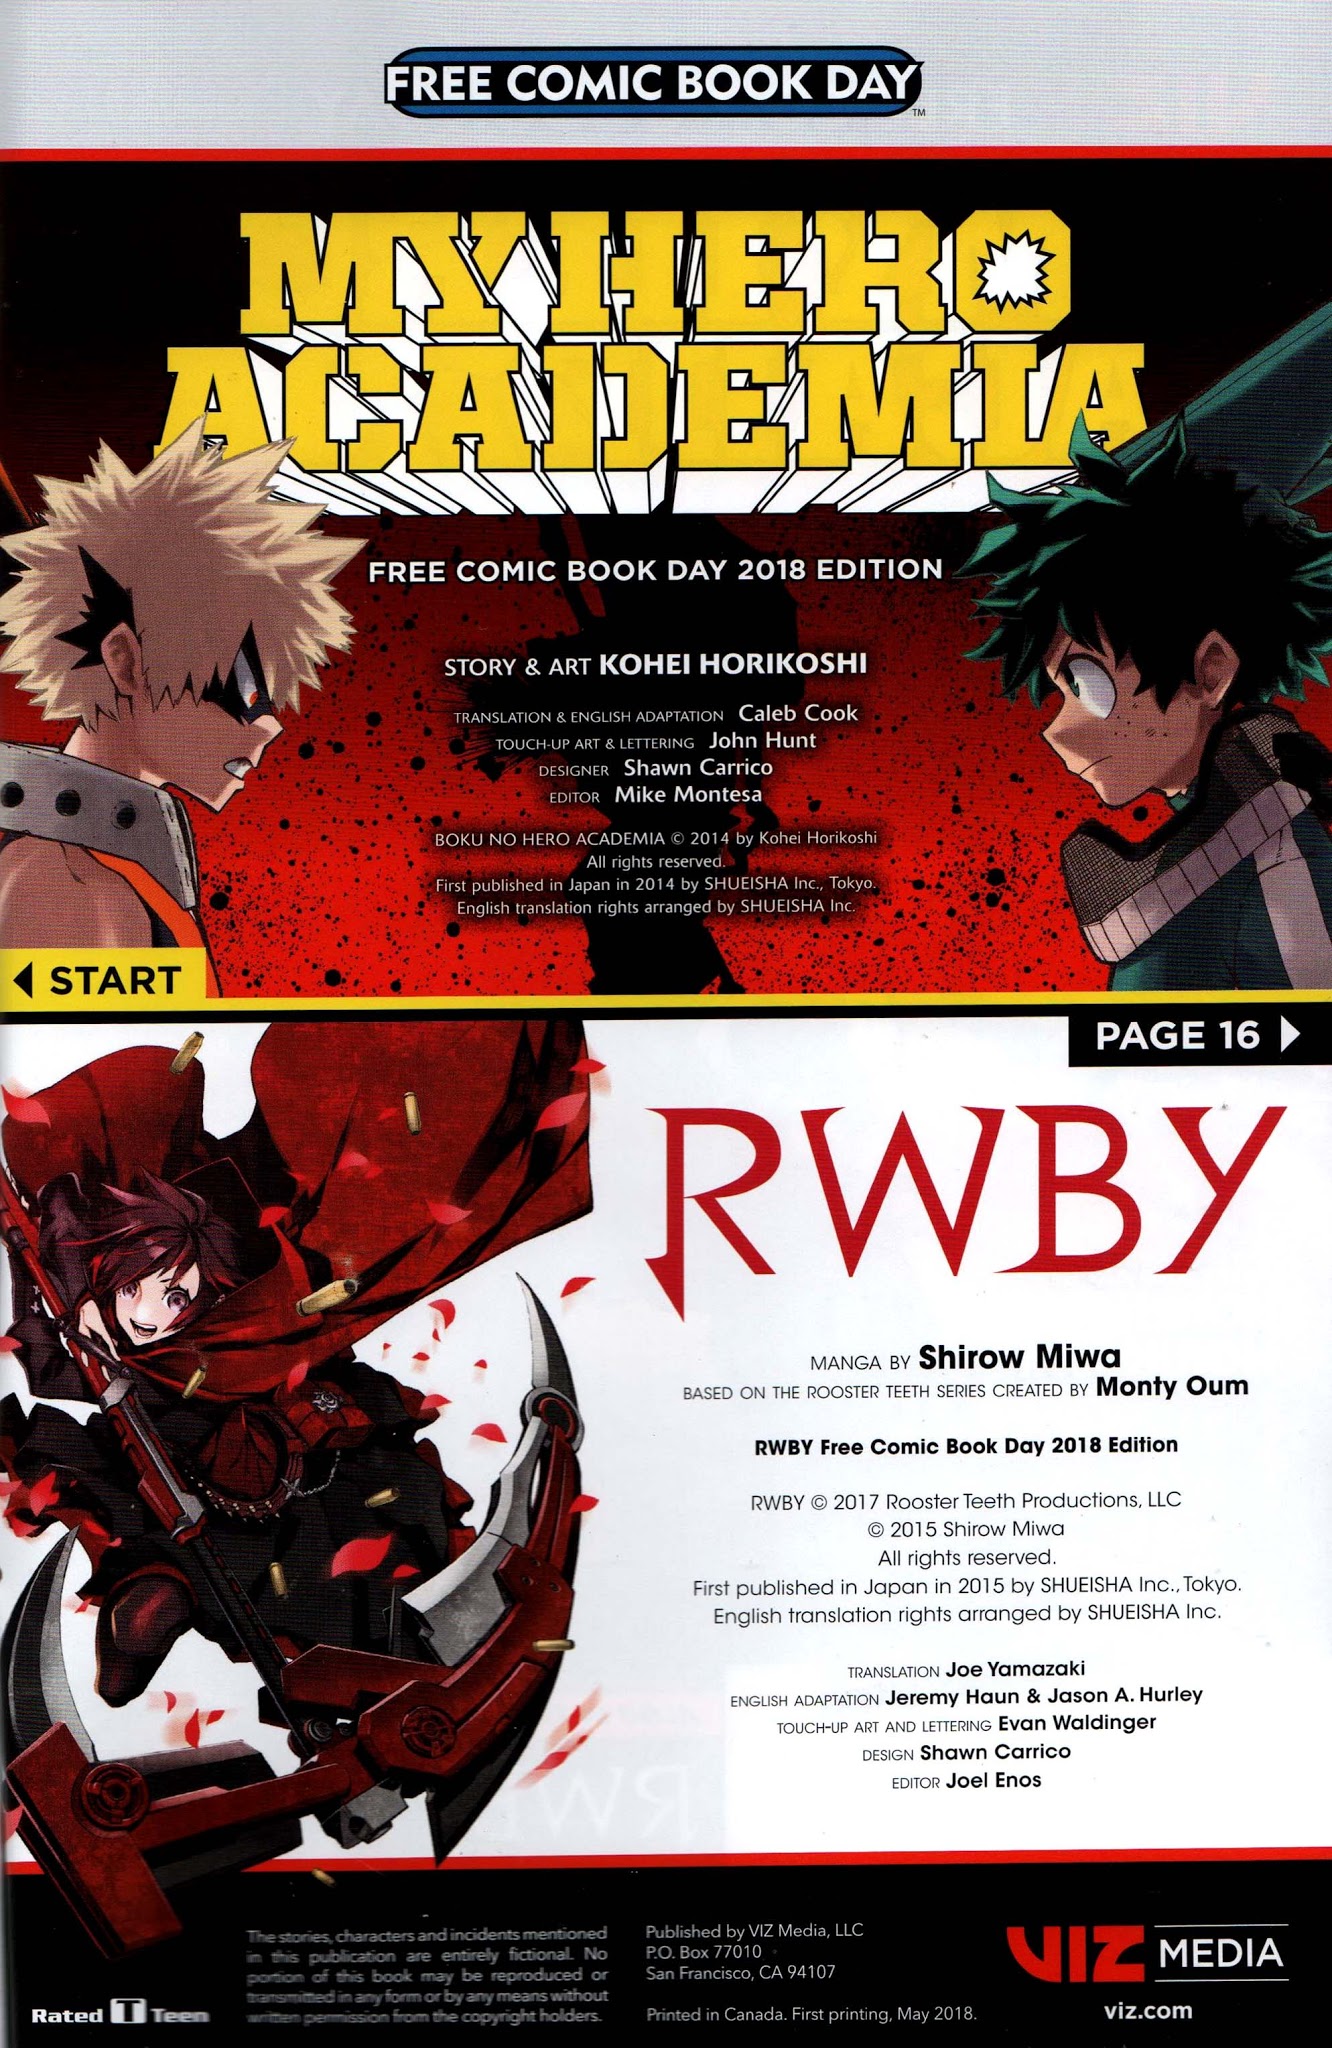 Read online Free Comic Book Day 2018 comic -  Issue # My Hero Academia - RWBY - 2